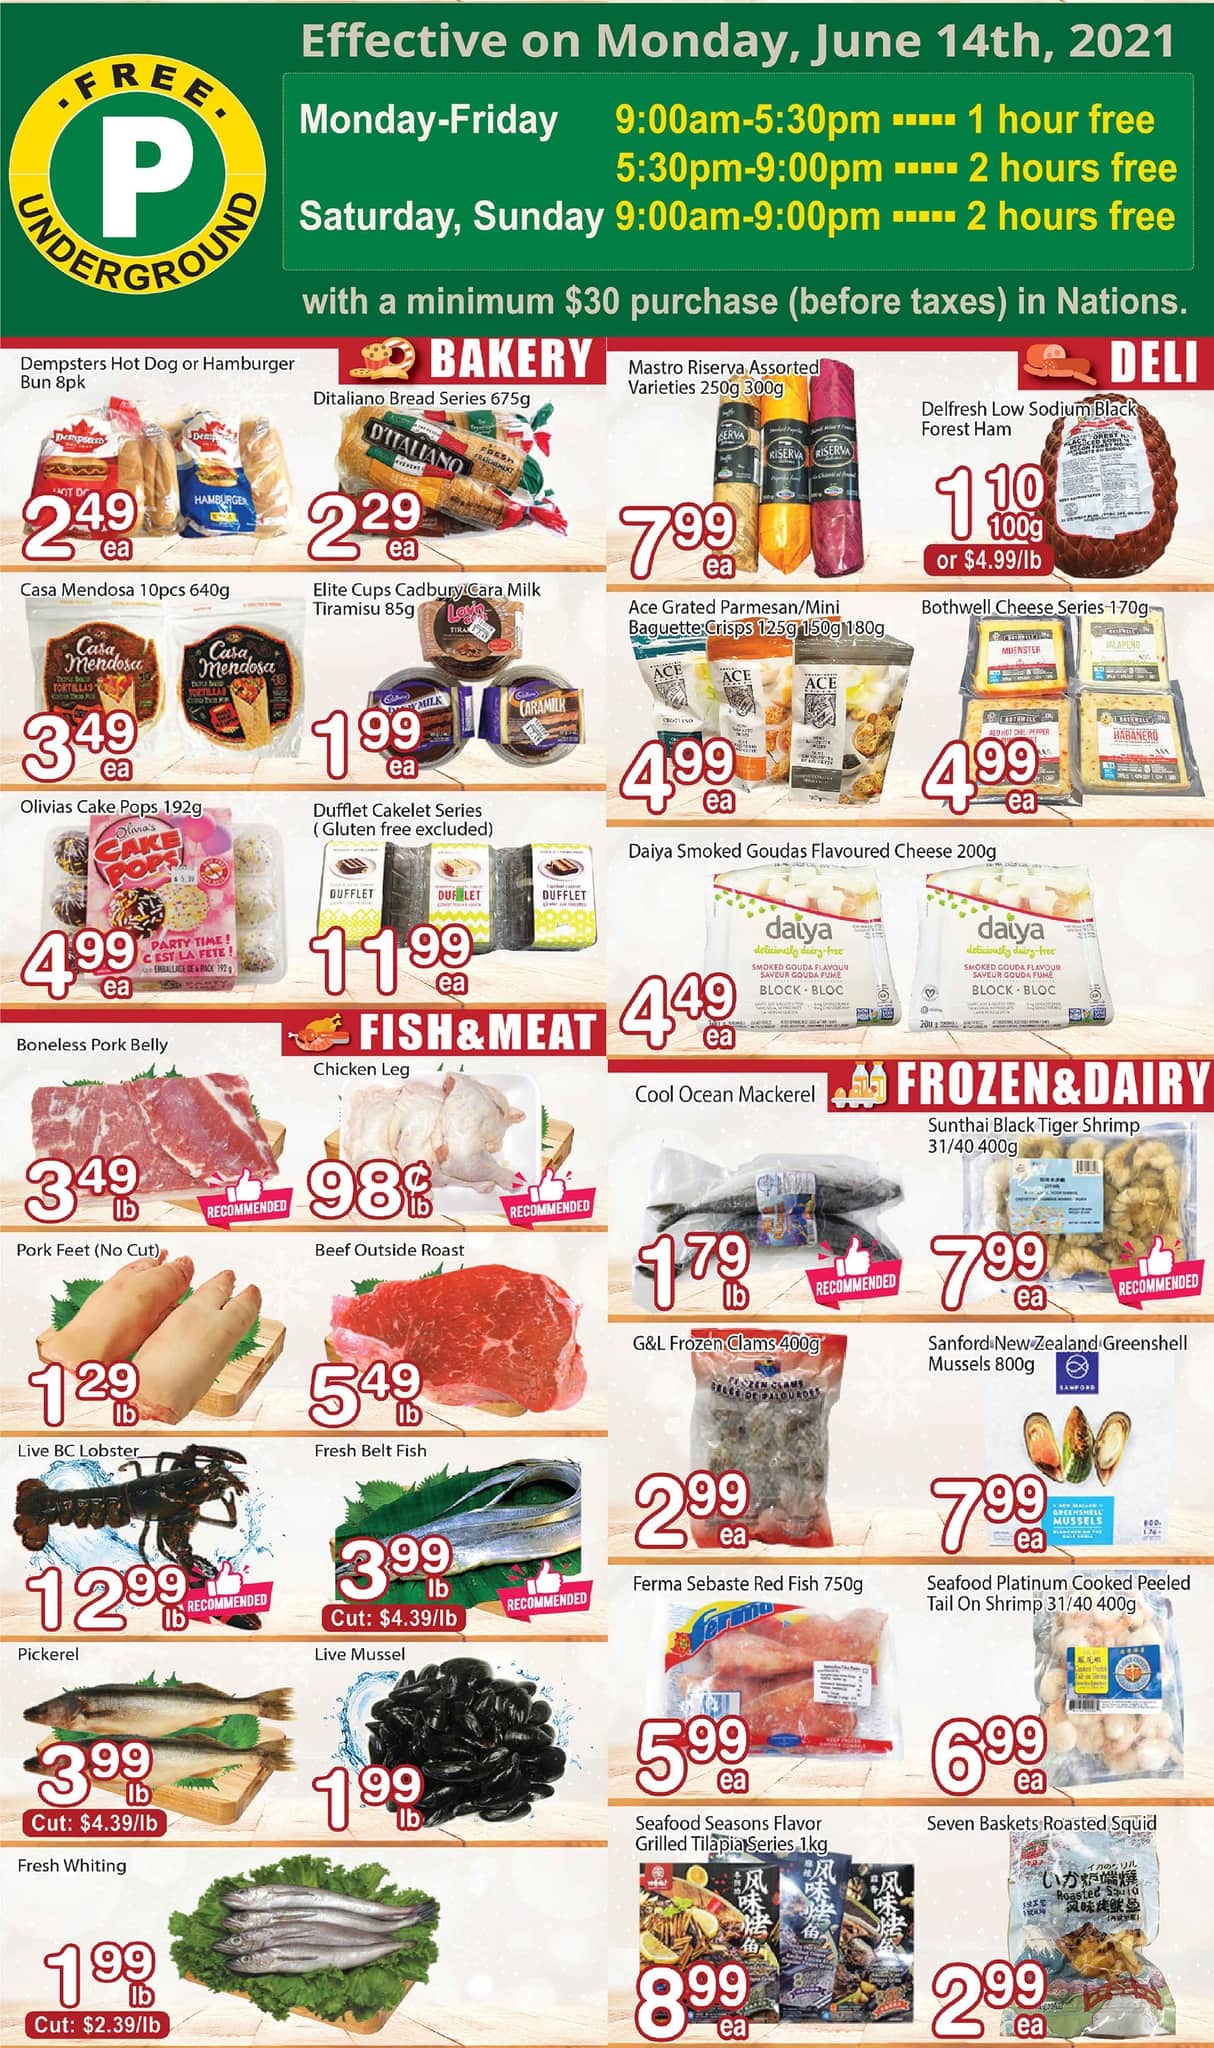 Nations Fresh Foods - Weekly Flyer Specials - Page 2